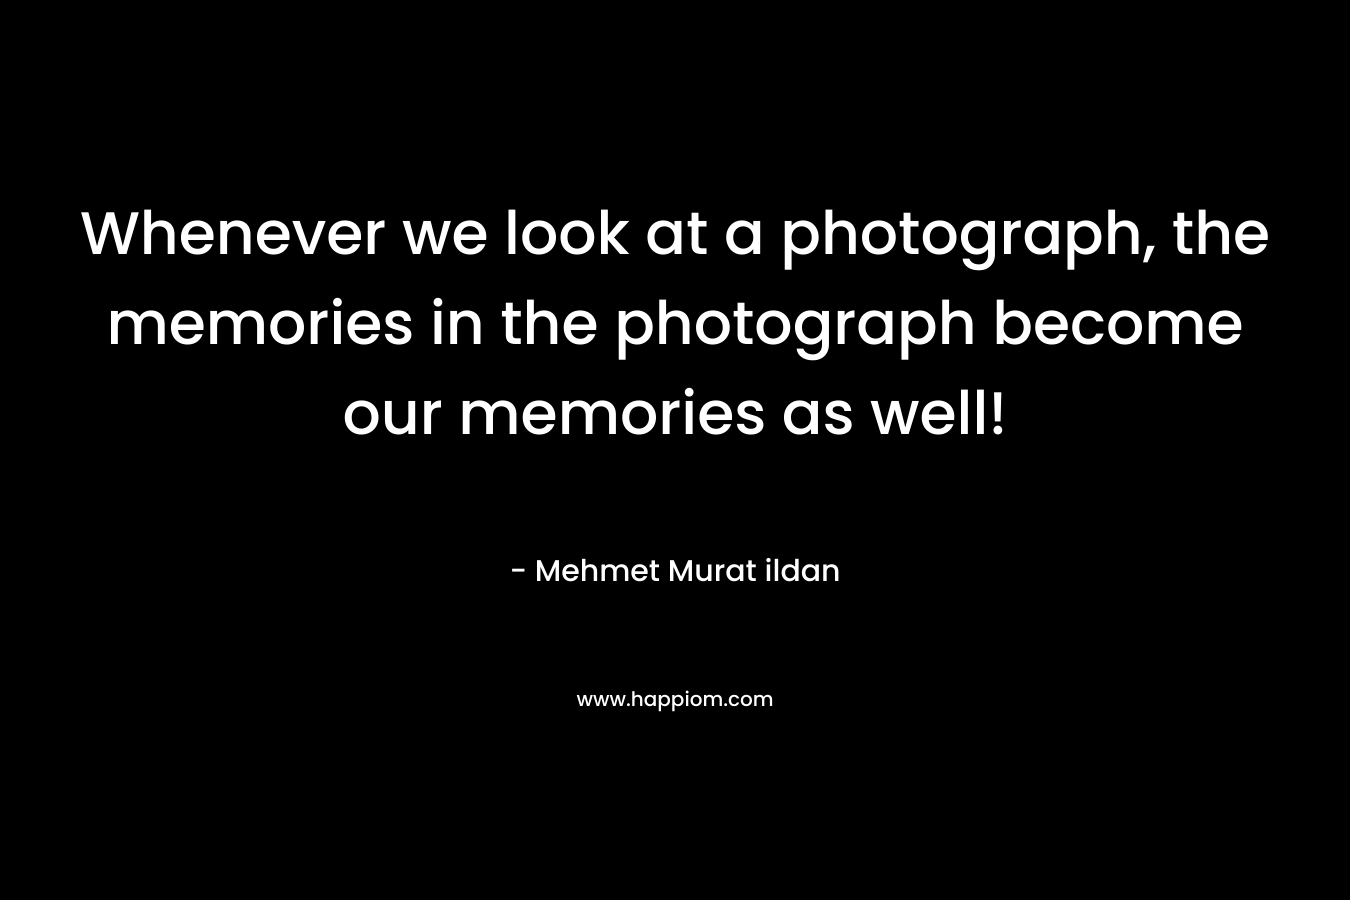 Whenever we look at a photograph, the memories in the photograph become our memories as well! – Mehmet Murat ildan